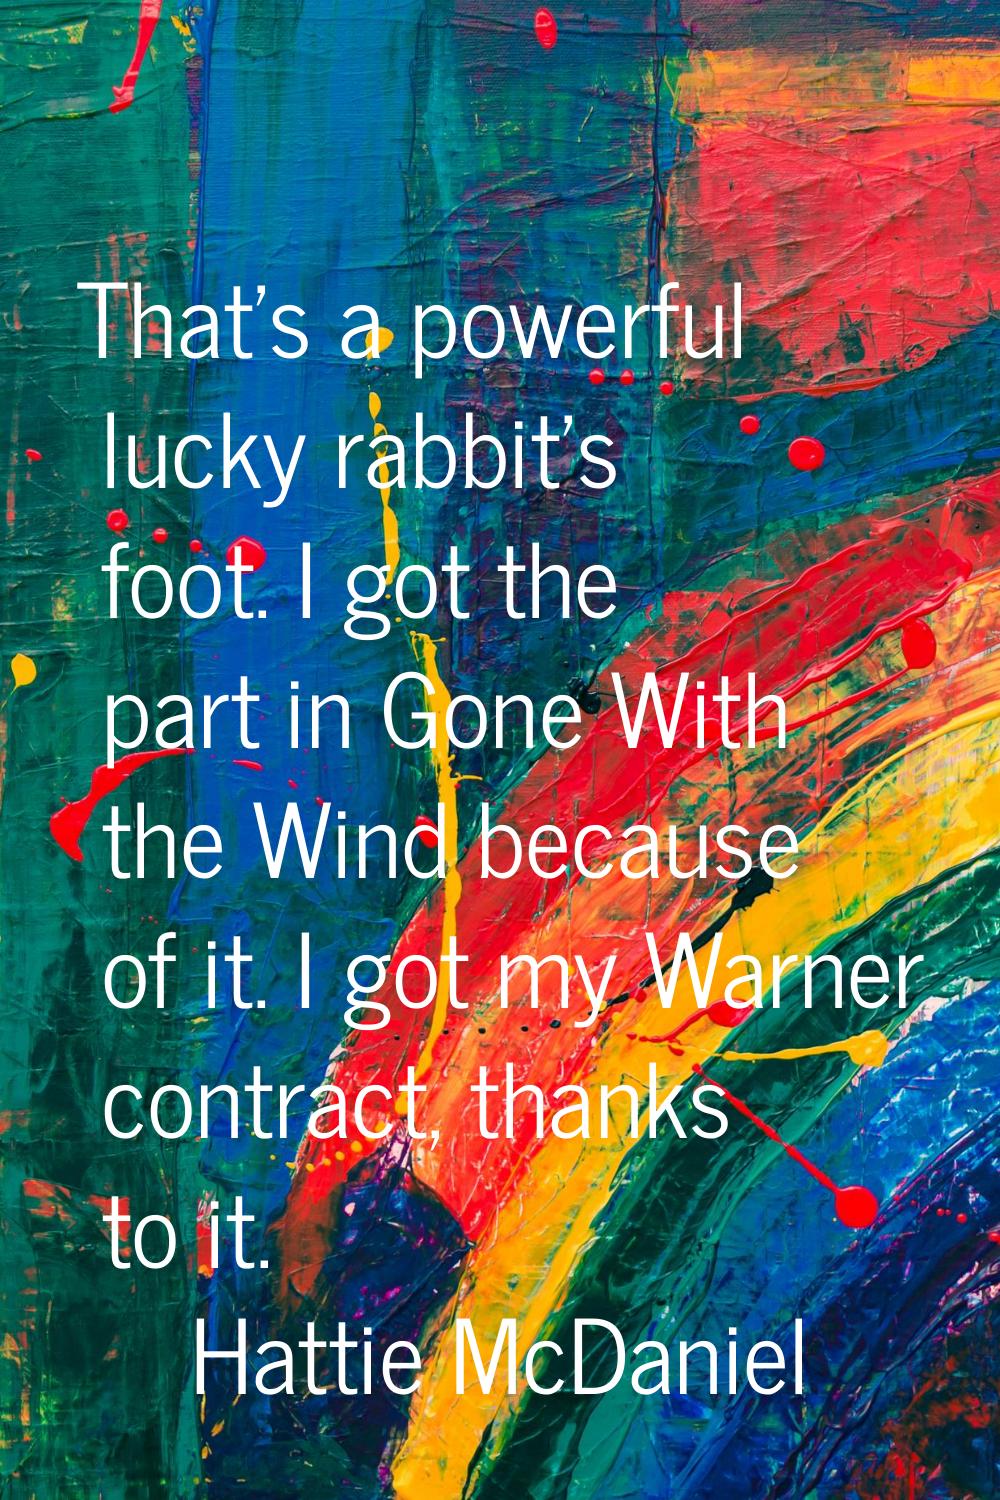 That's a powerful lucky rabbit's foot. I got the part in Gone With the Wind because of it. I got my